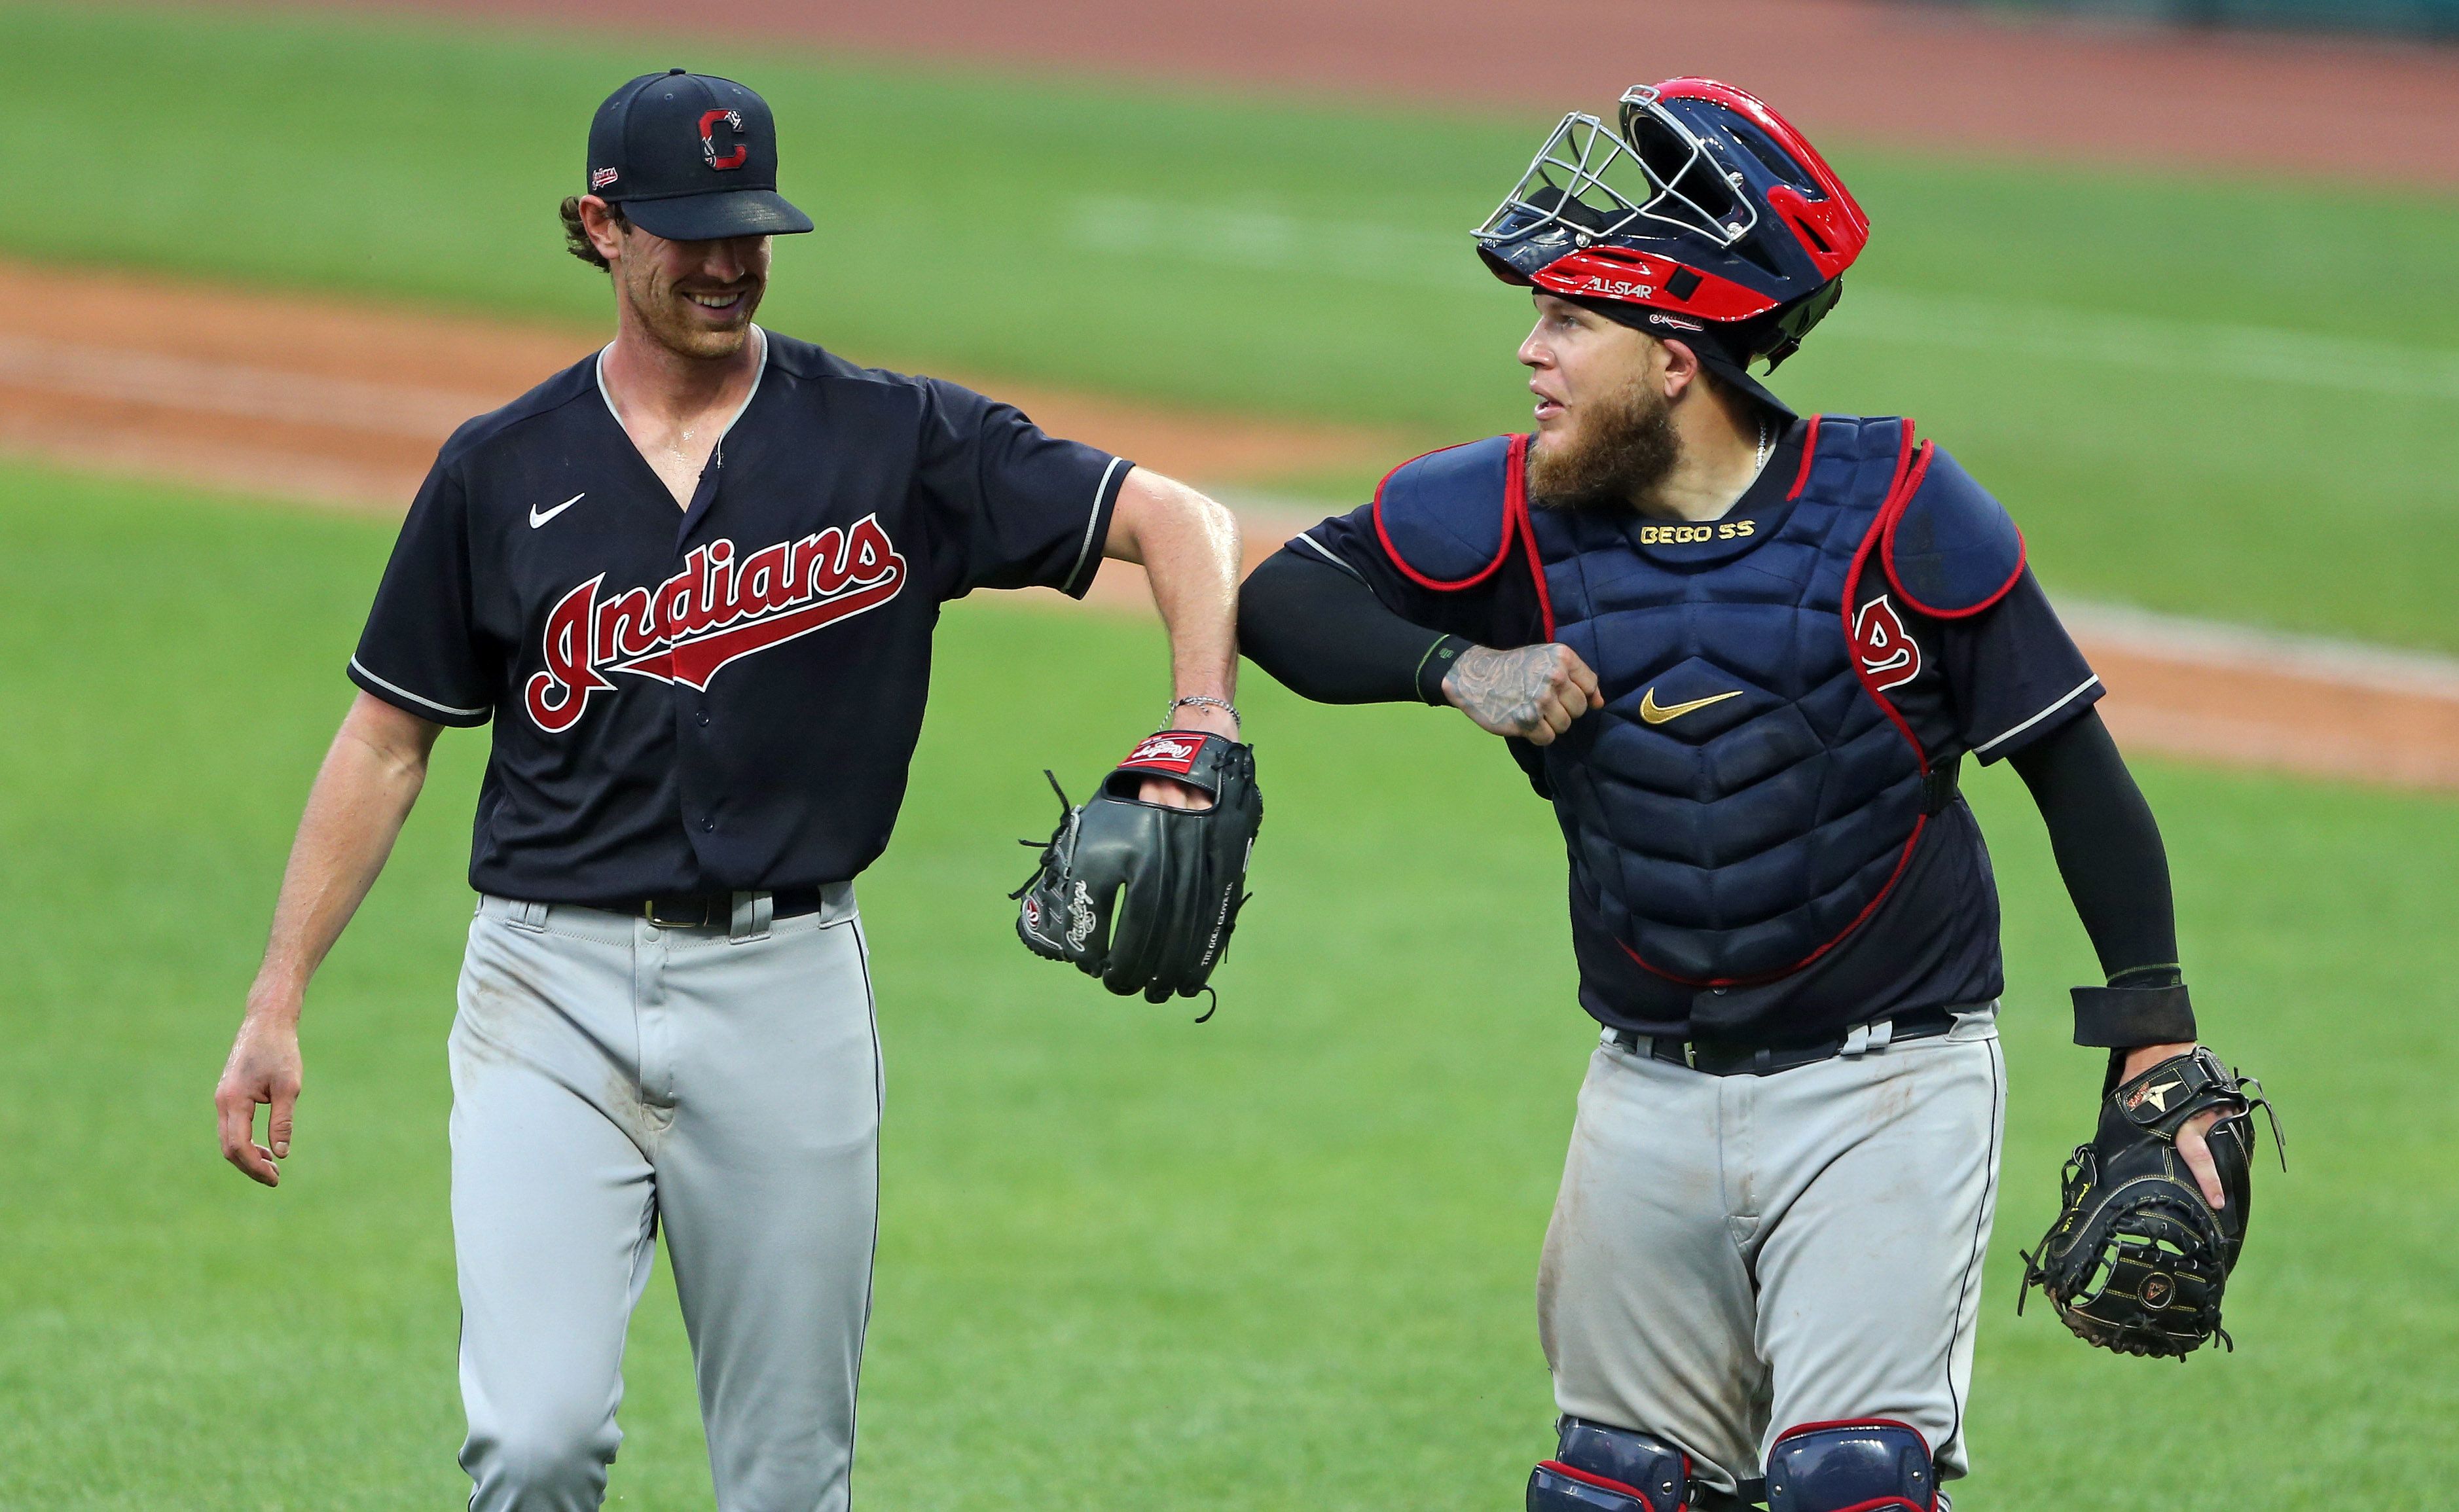 How do 'real' Cleveland Indians feel about team's name change